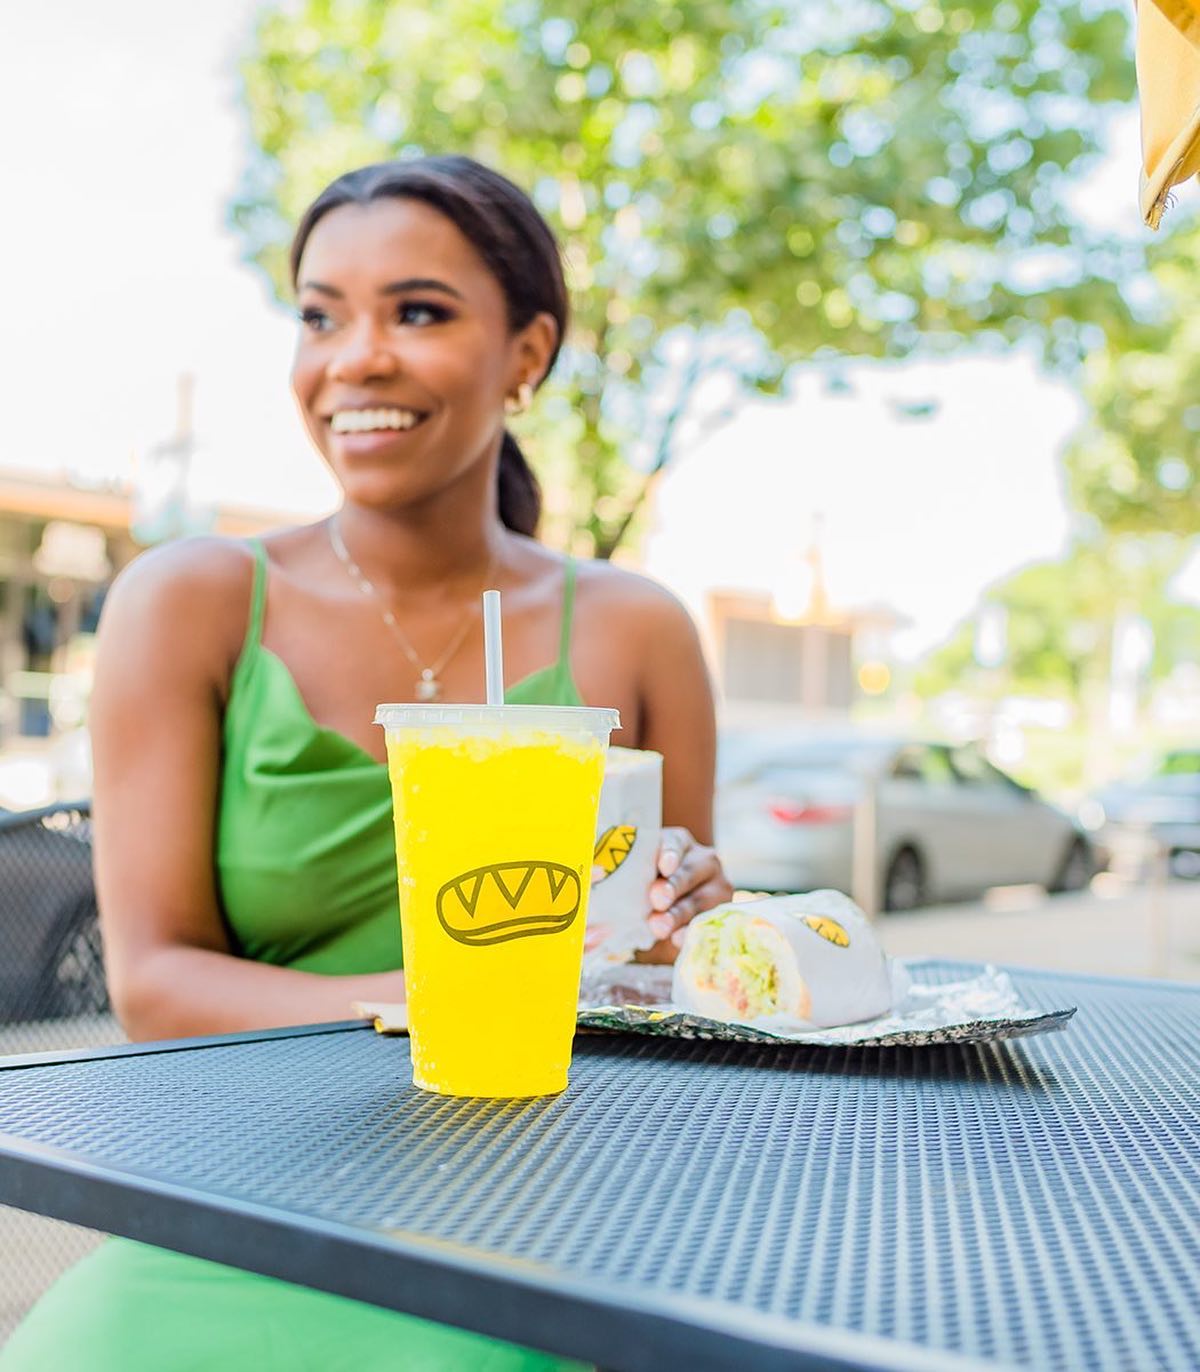 Brighten up your day with Which Wich!